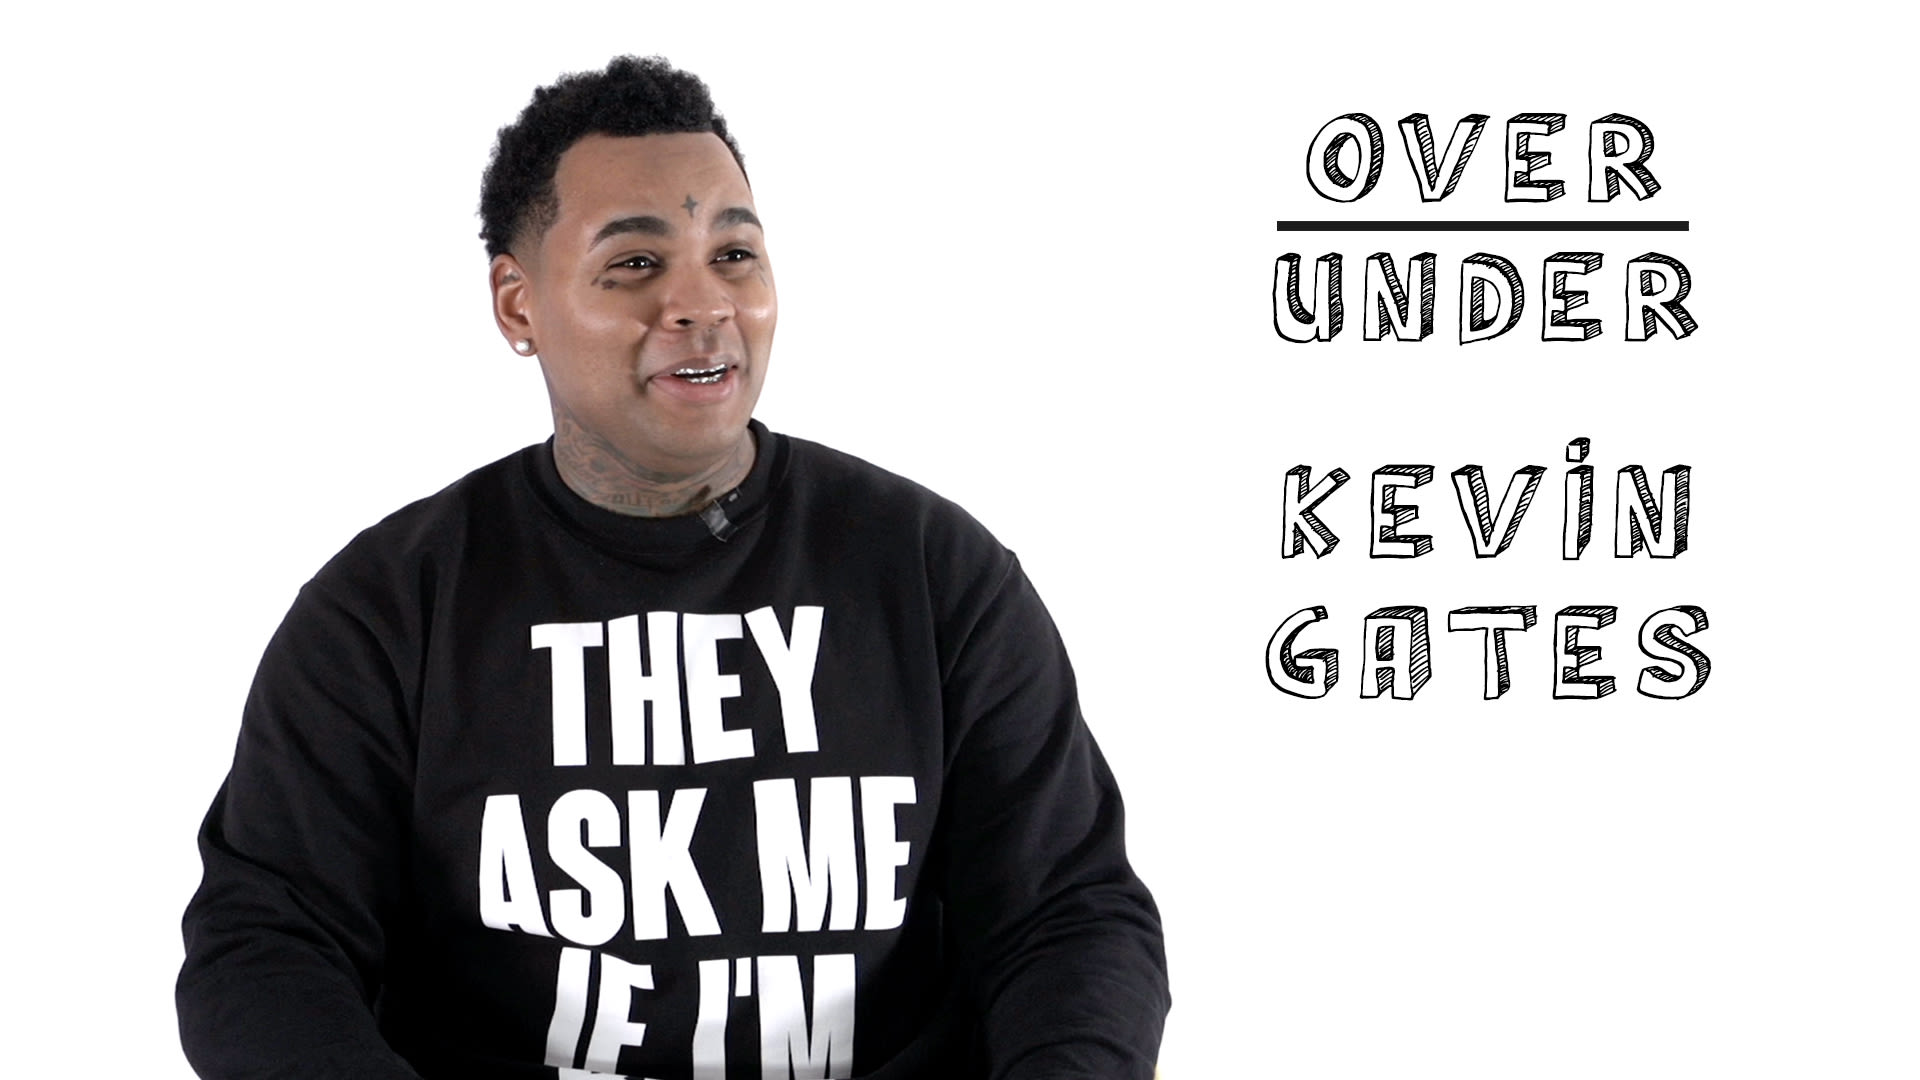 Watch Kevin Gates Rates Leonardo DiCaprio, Taylor Swift, and the Red Hot Chili Peppers Over/Under Over/Under Pitchfork image